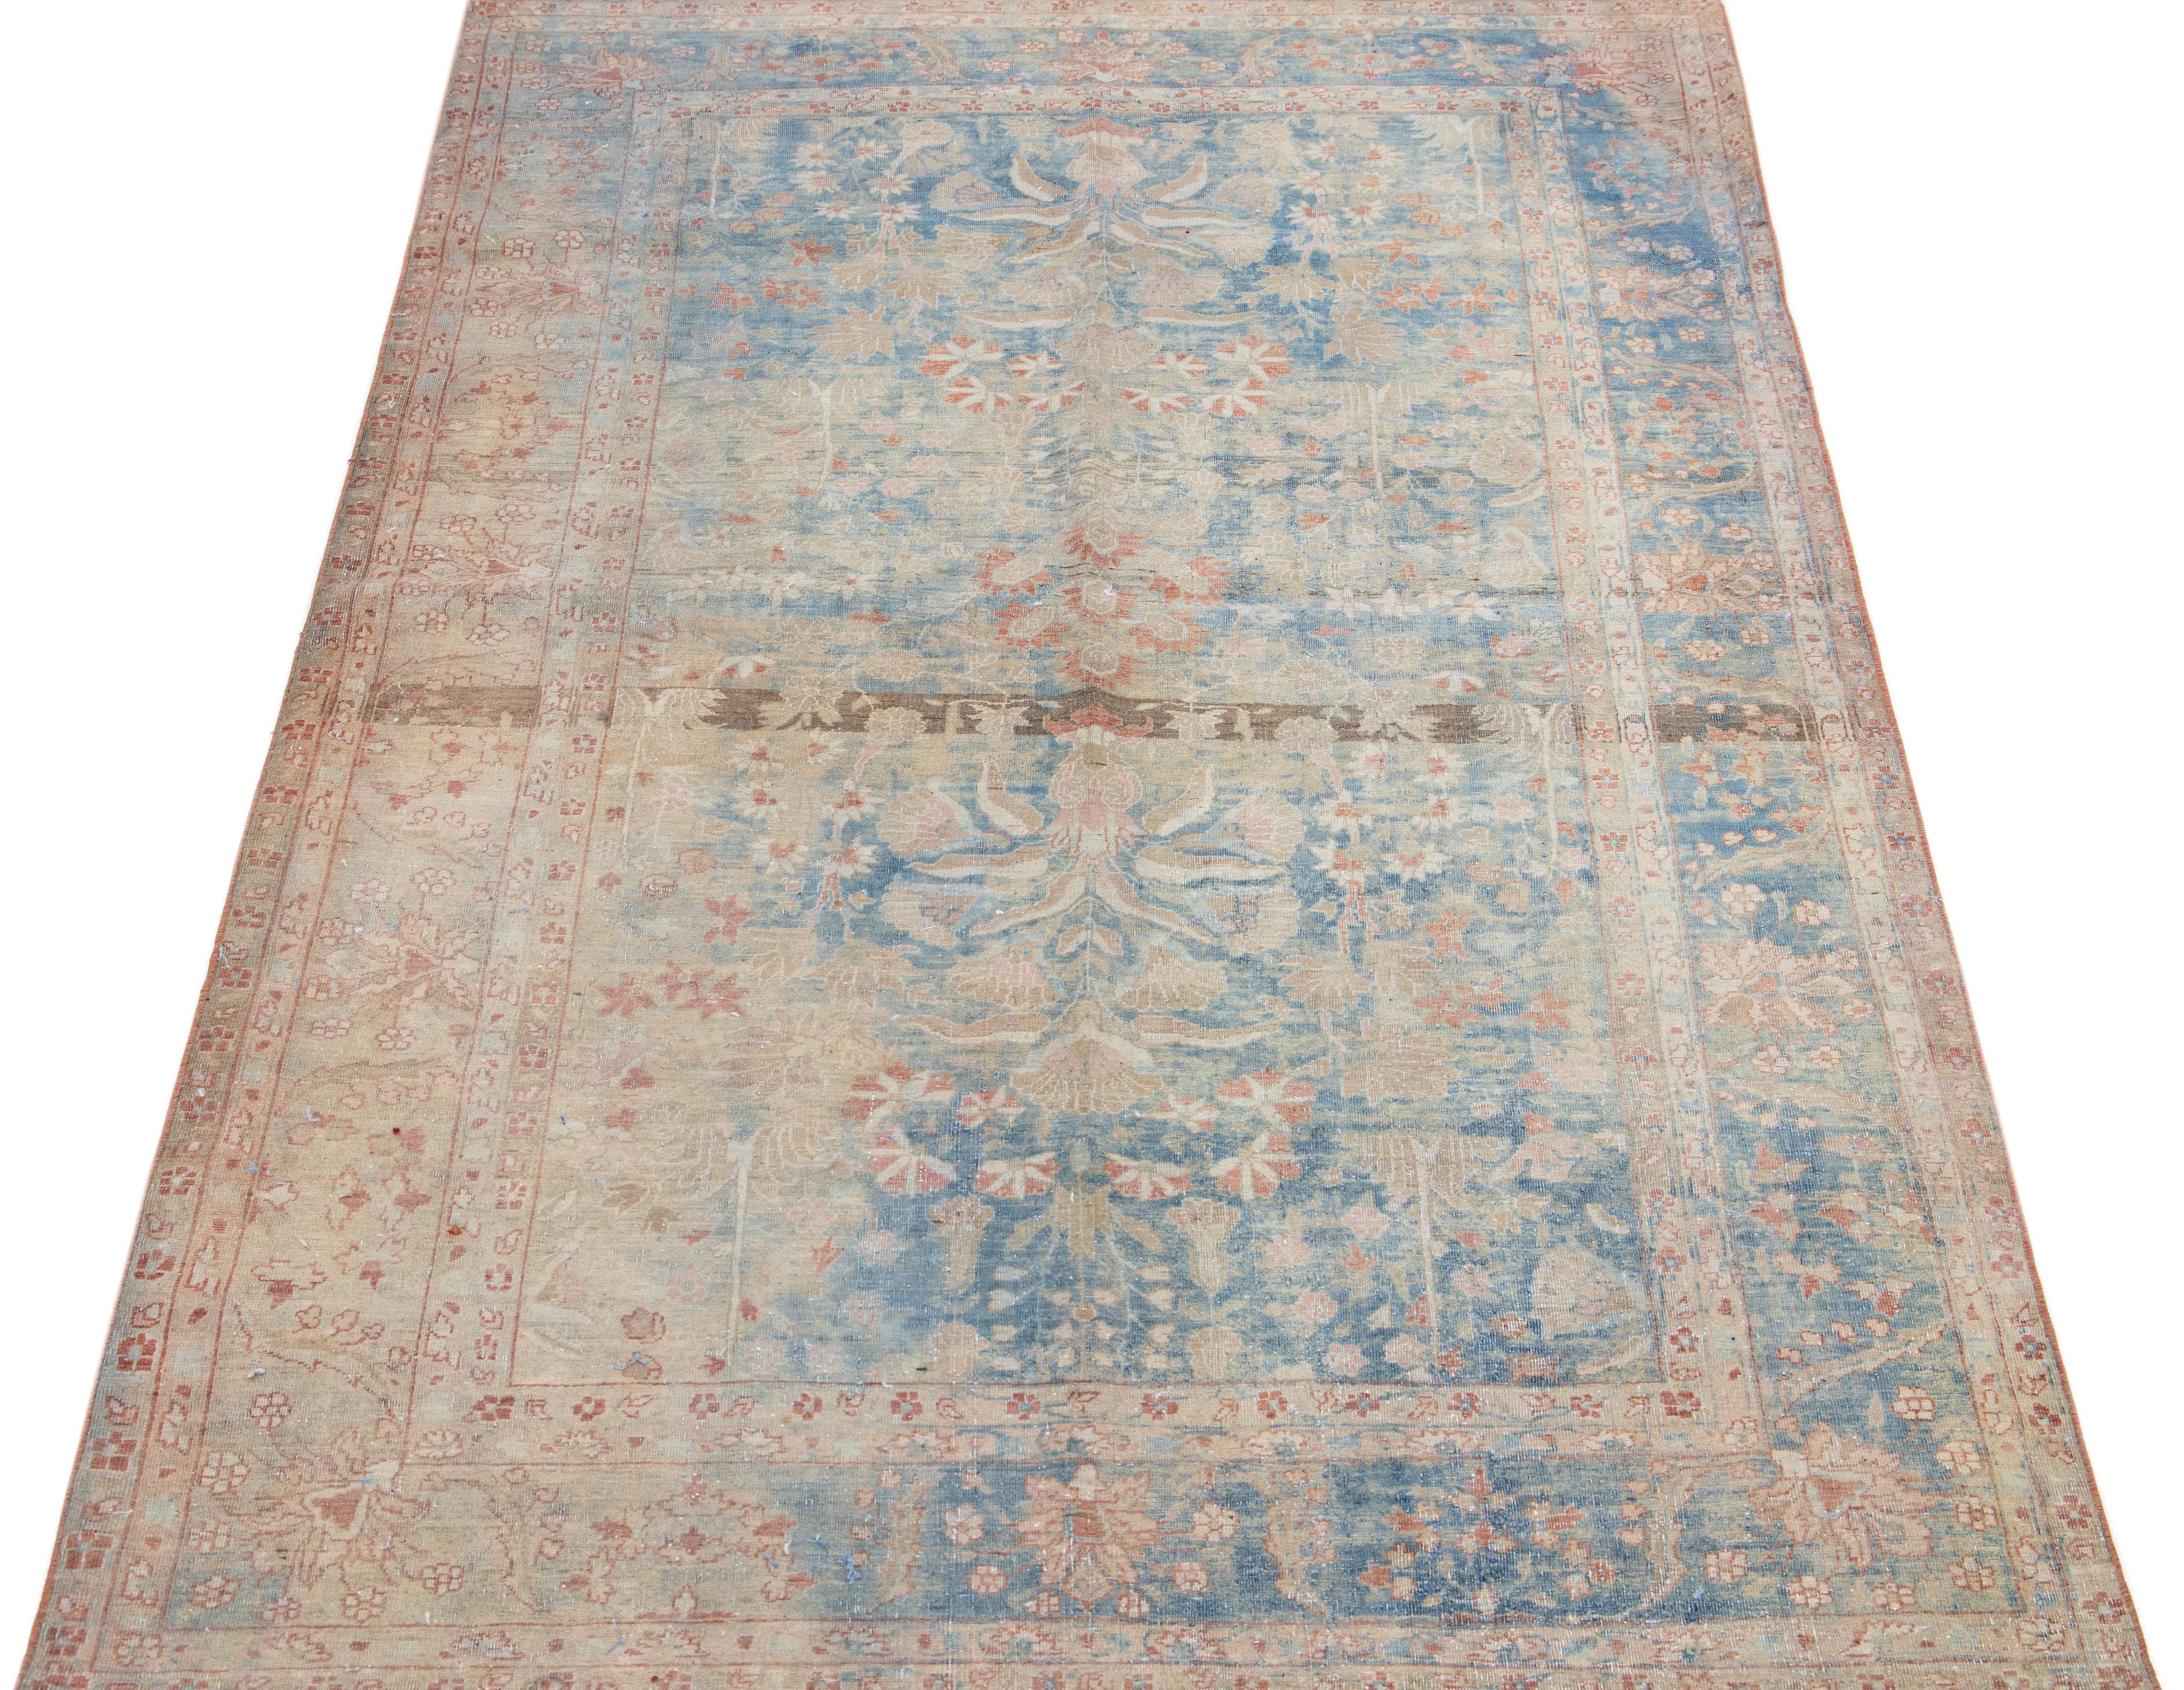 Beautiful Antique Sarouk hand-knotted wool rug with a blue color field. This Persian rug has a Classic floral design in beige, rust, and brown.

This rug measures: 4'1